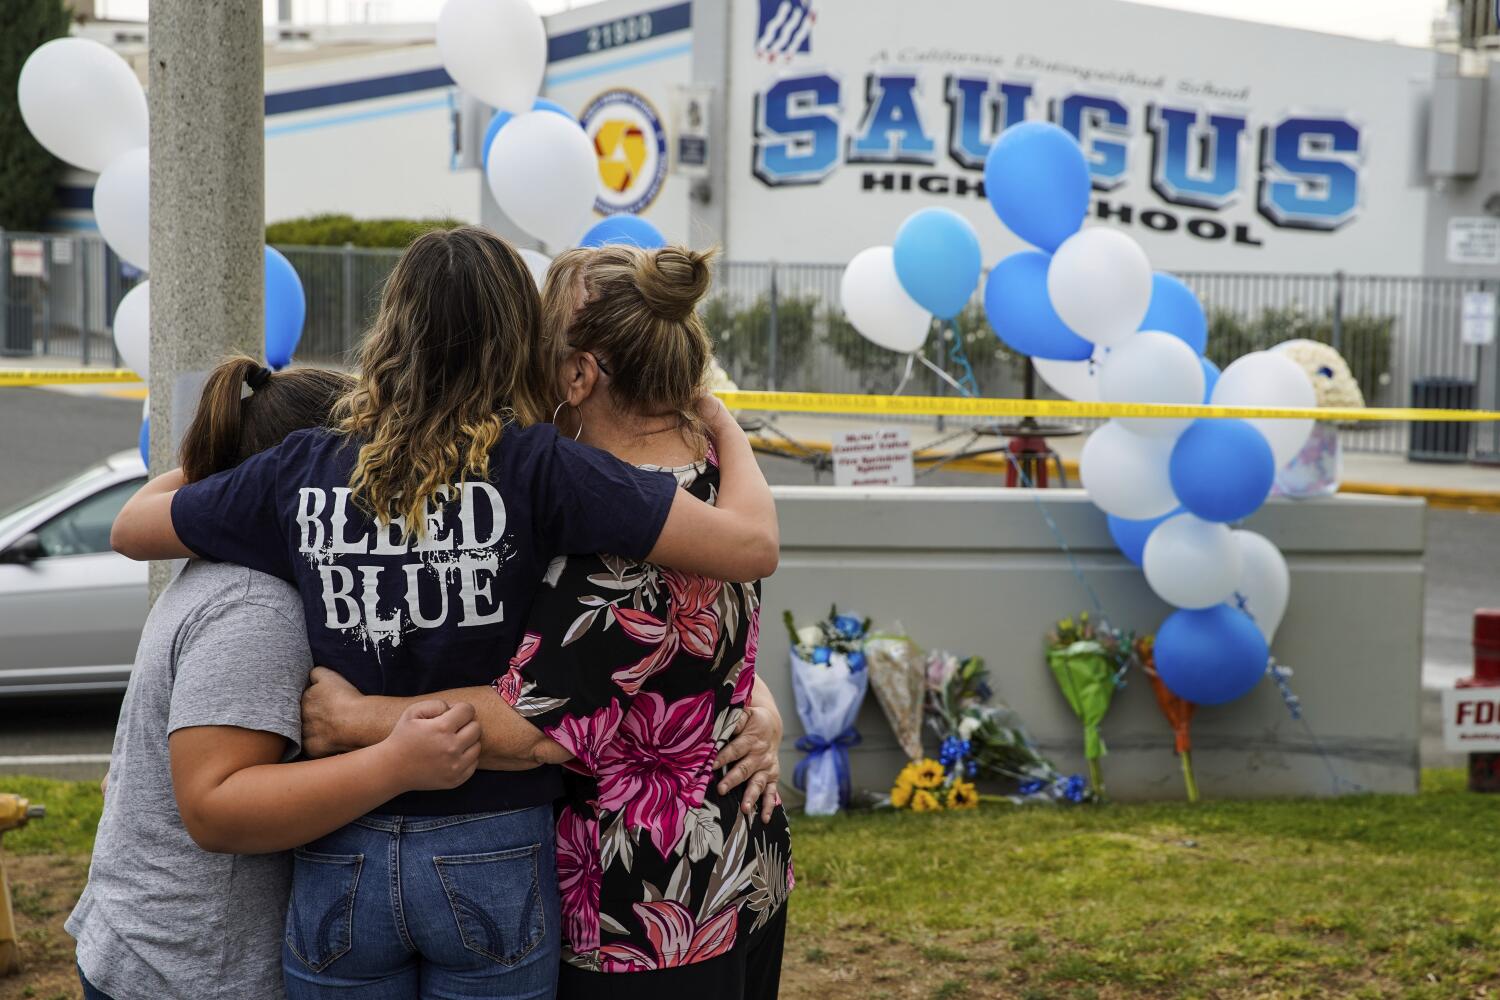 Their children were gunned down at Saugus High. Parents sue for $50 million over 'preventable' tragedy